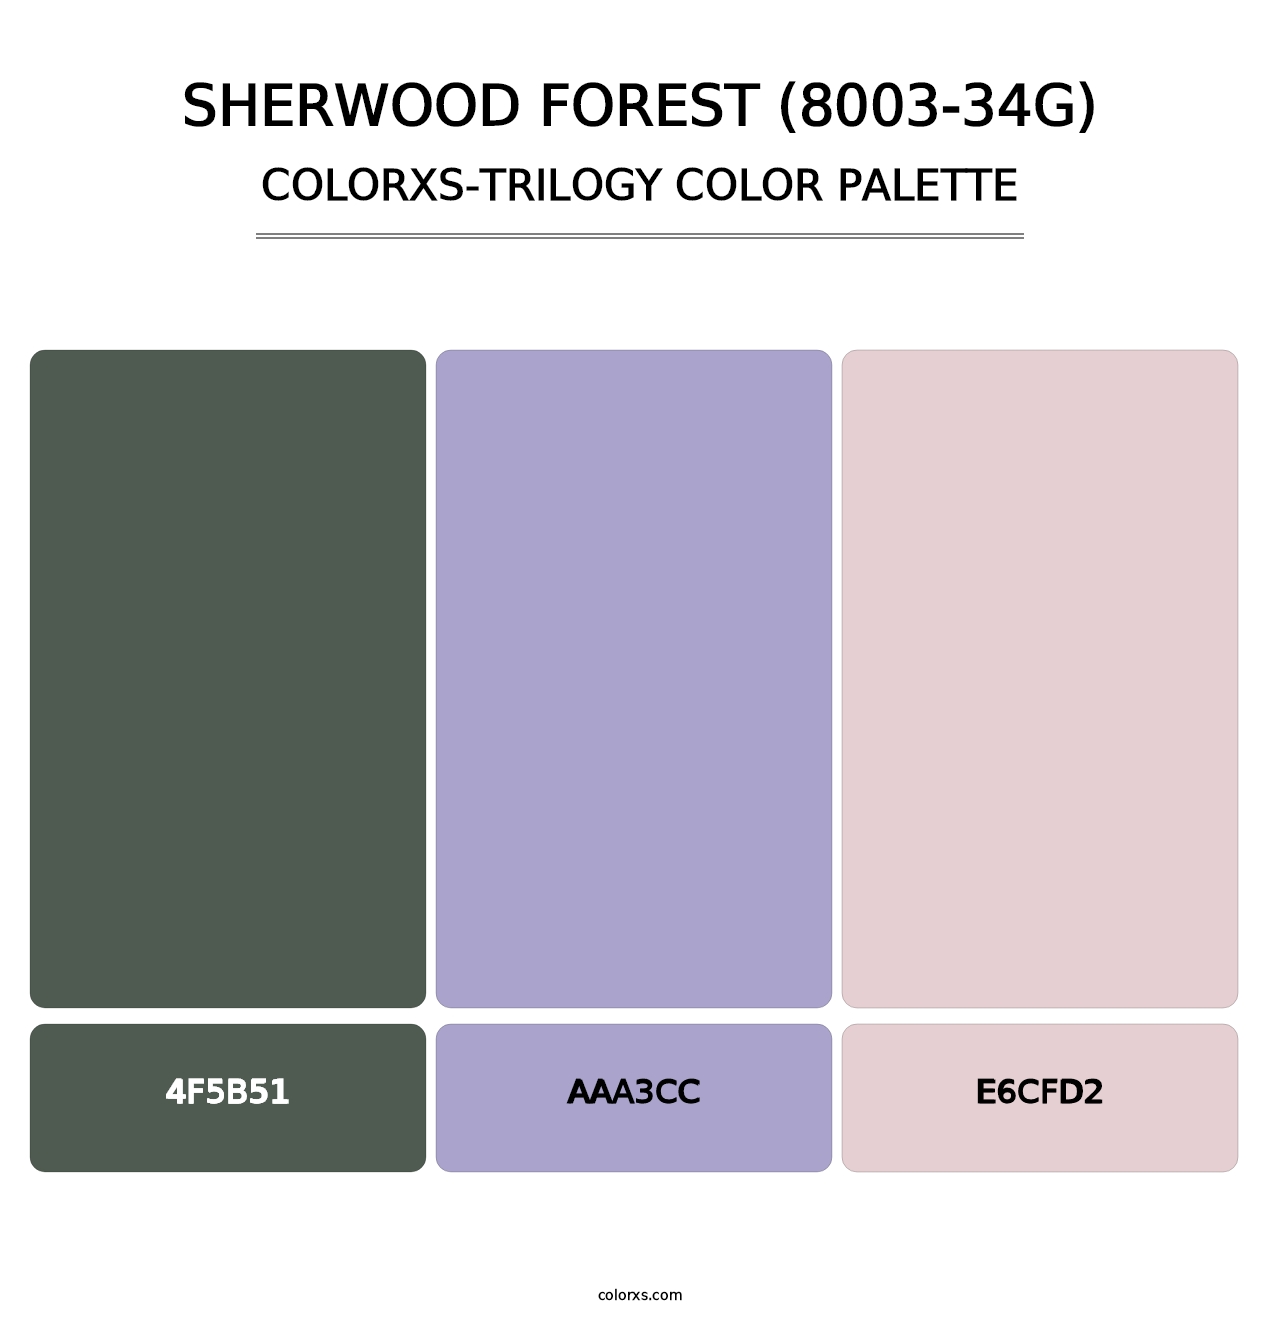 Sherwood Forest (8003-34G) - Colorxs Trilogy Palette